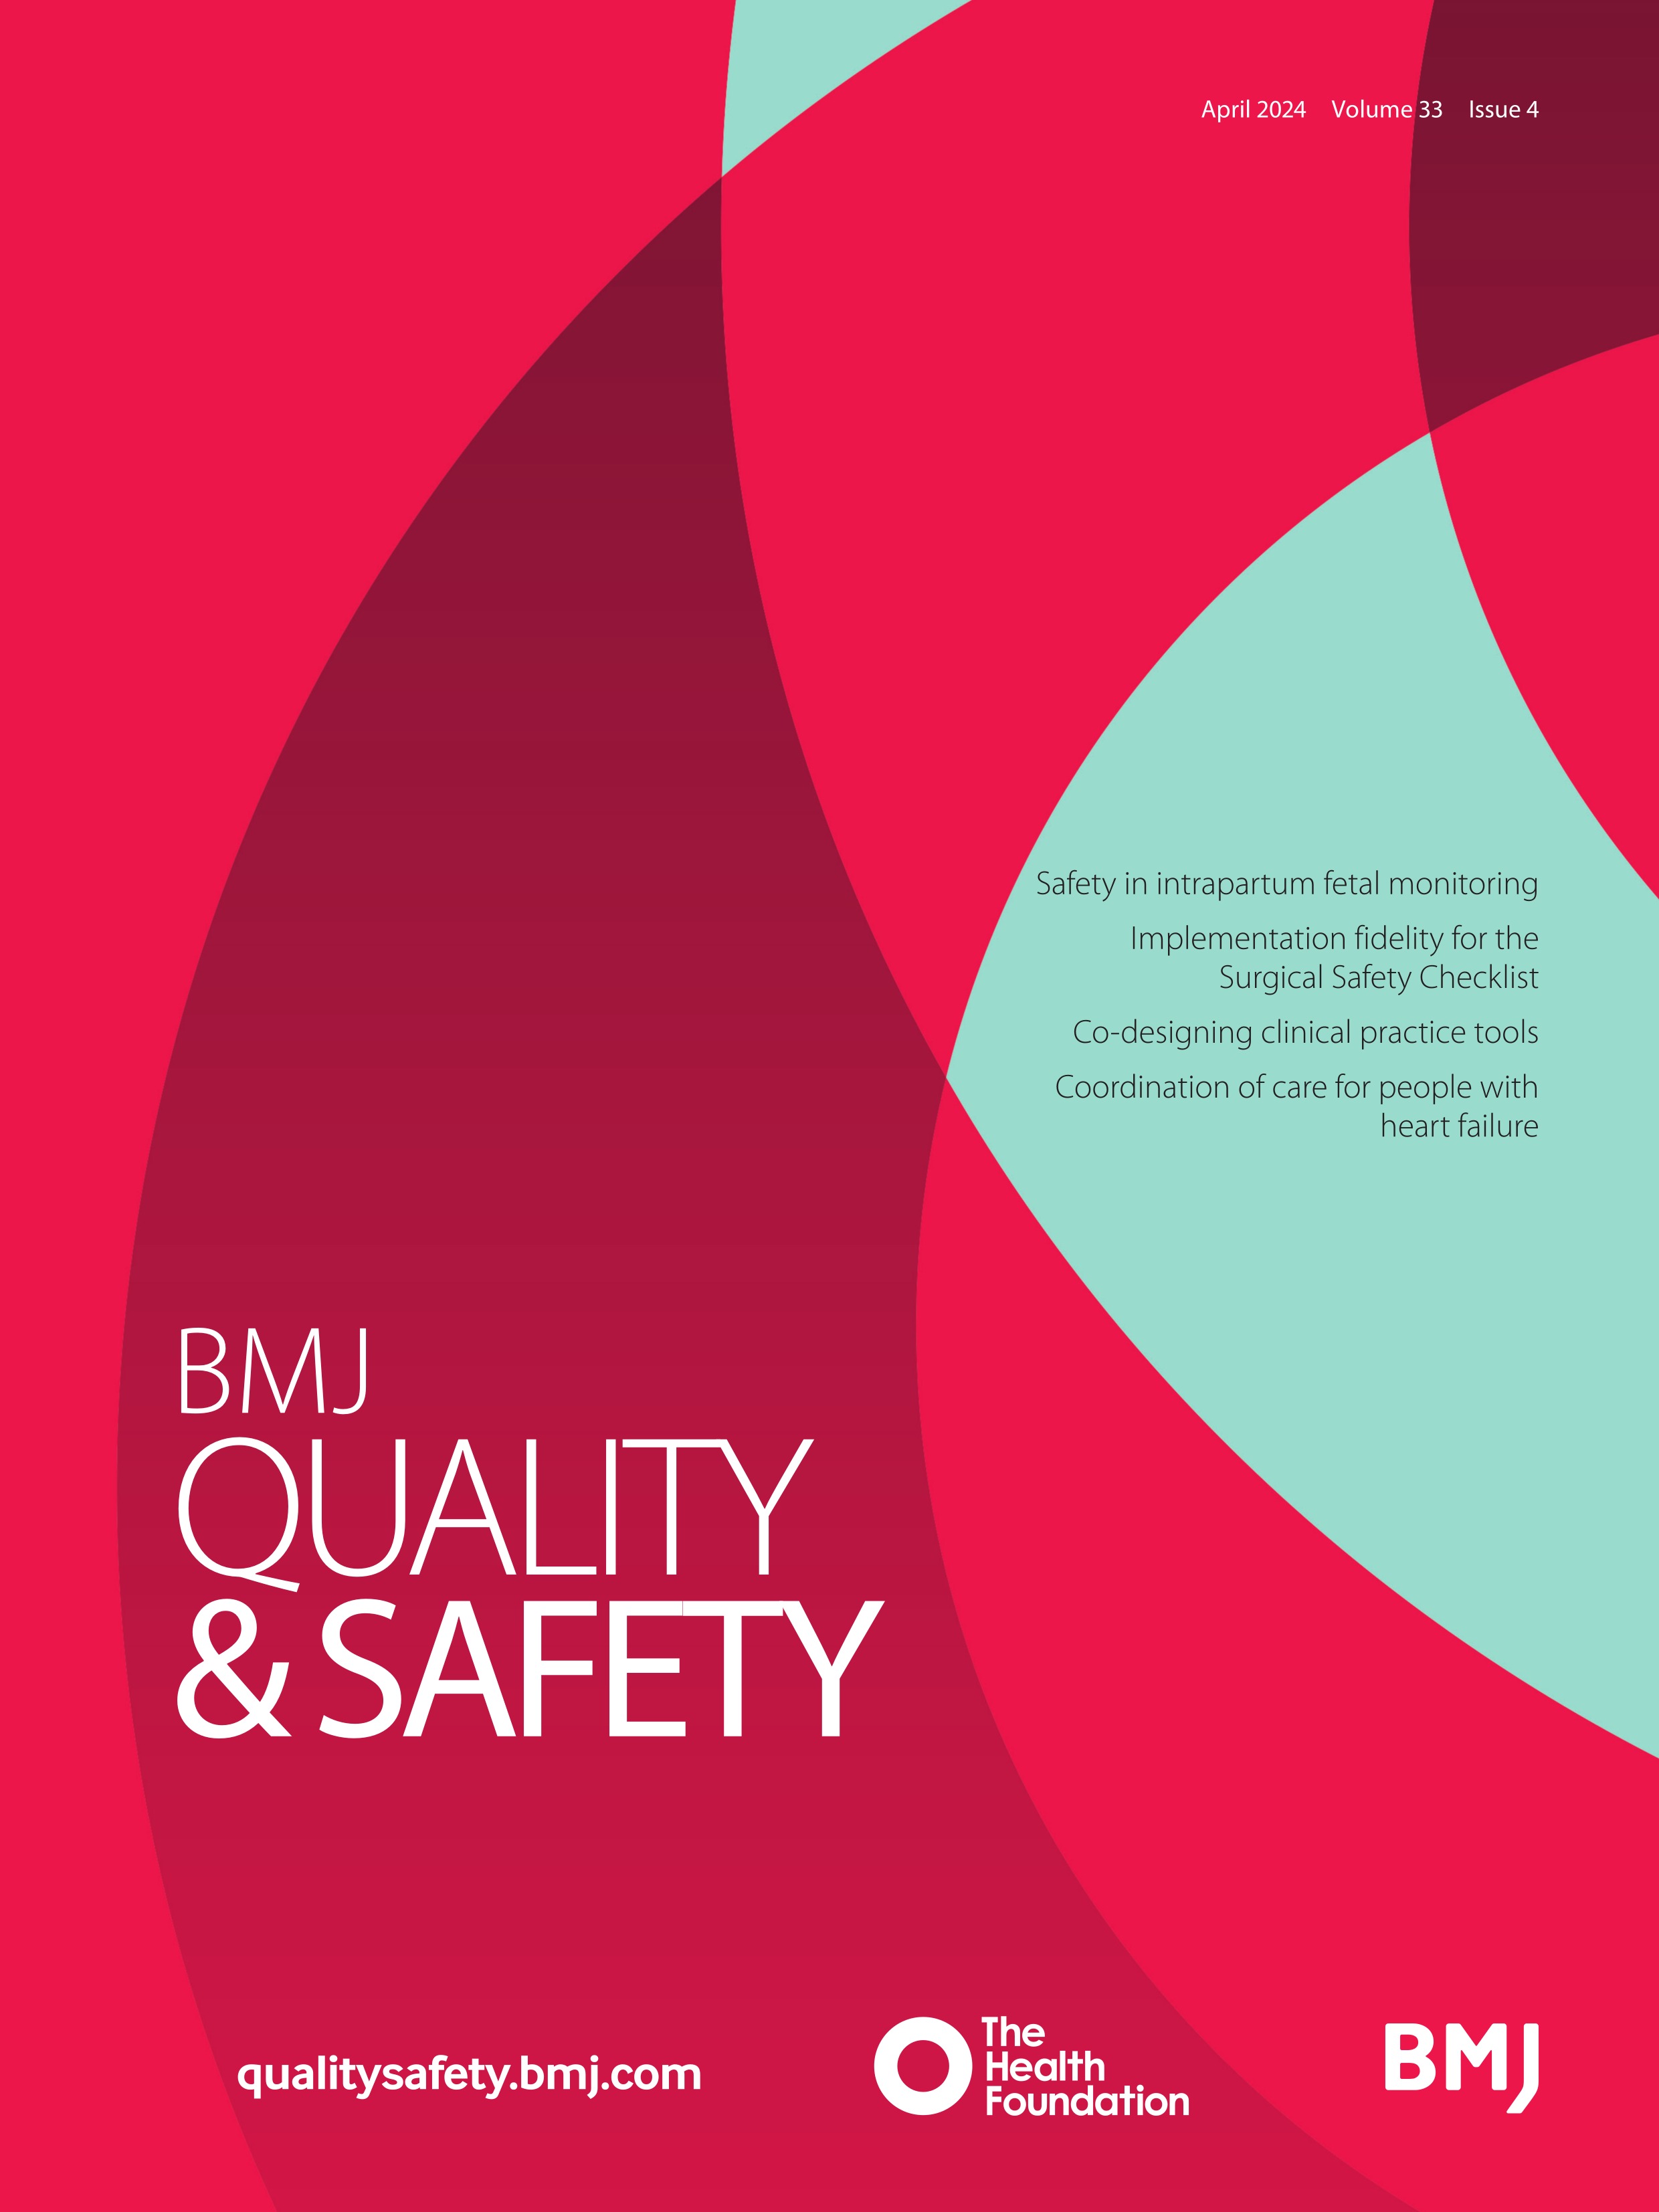 Informing understanding of coordination of care for patients with heart failure with preserved ejection fraction: a secondary qualitative analysis